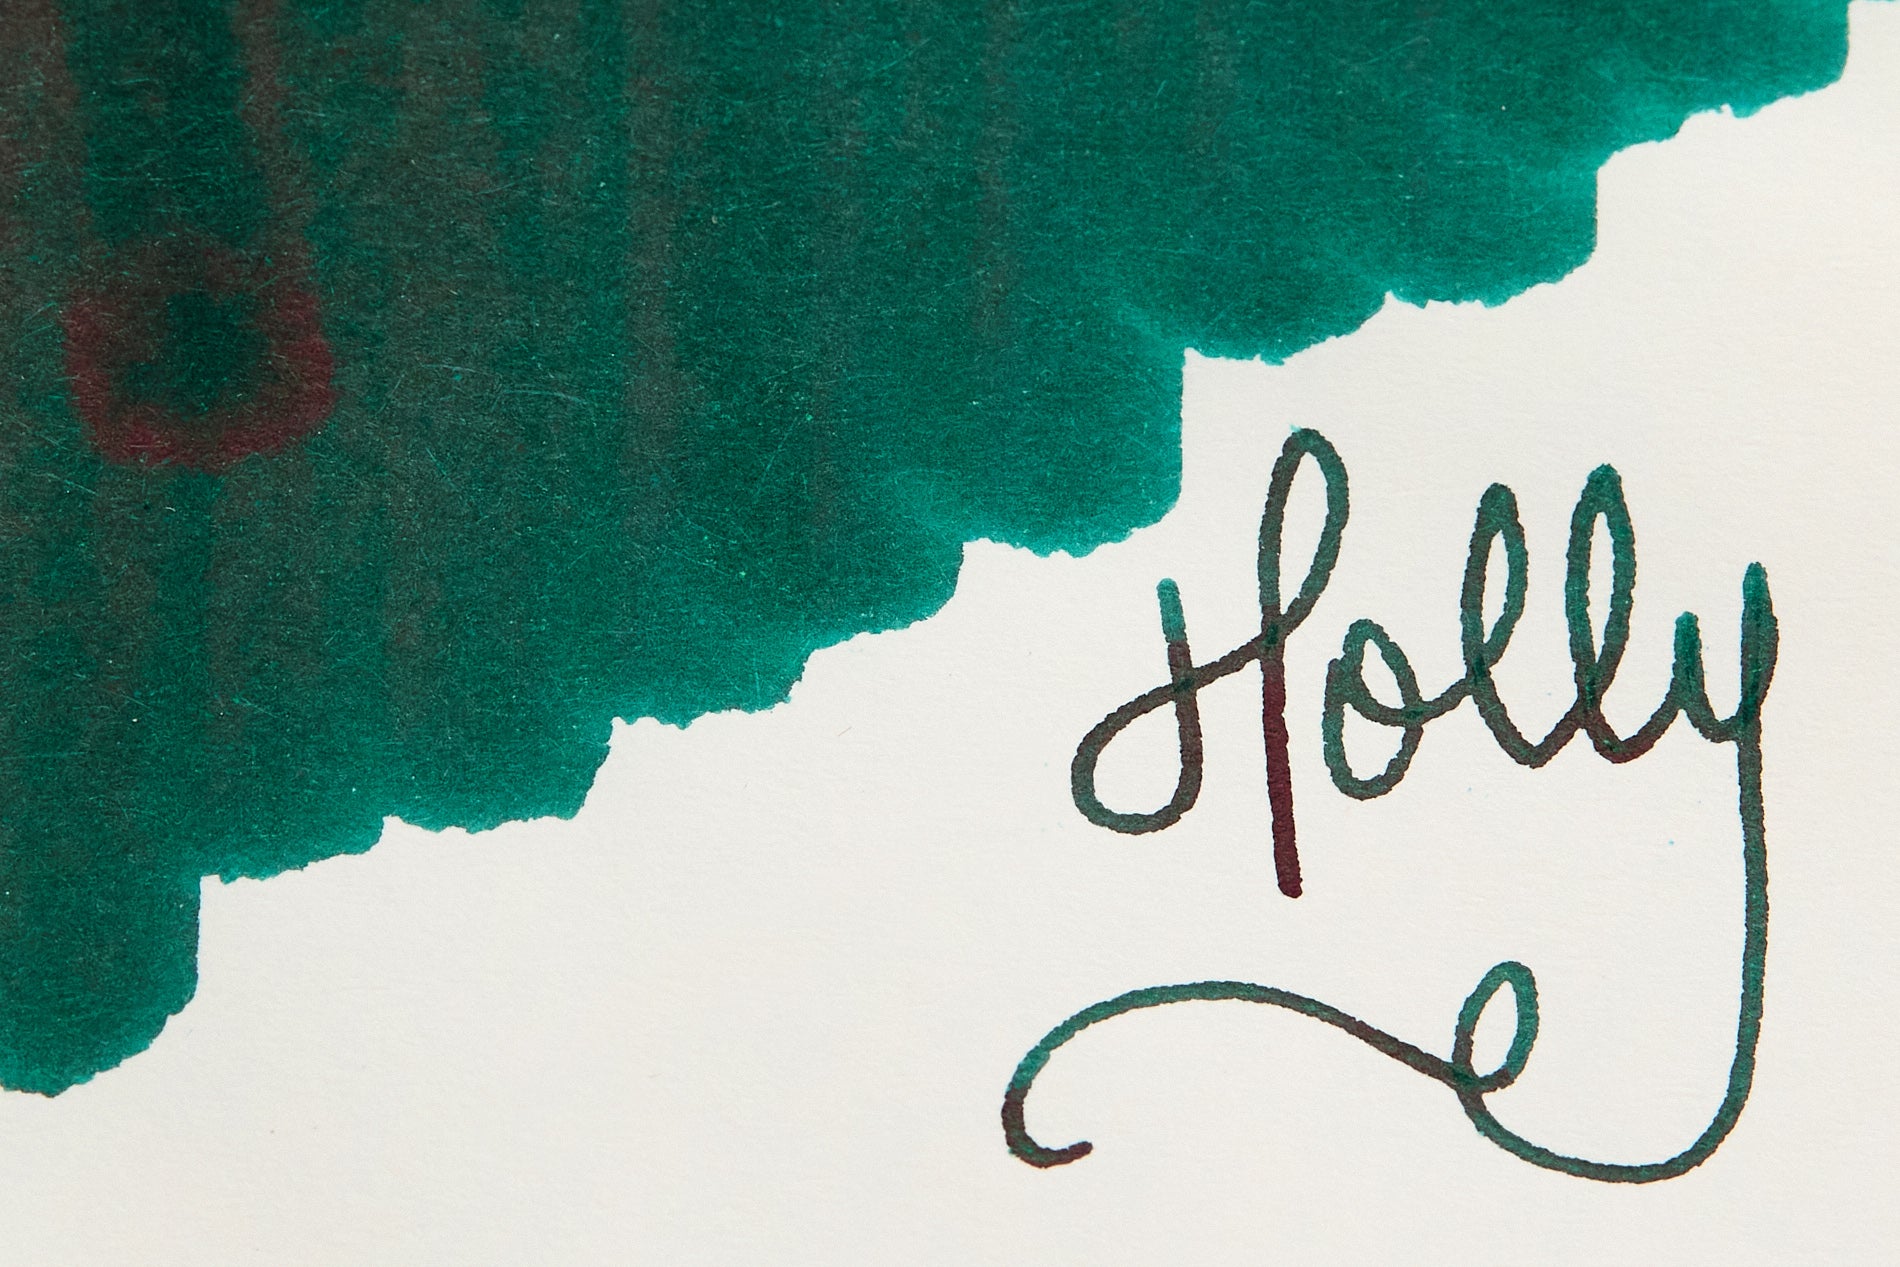 Diamine Holly Fountain Pen Ink swab sample upclose and more green, very little sheen showing